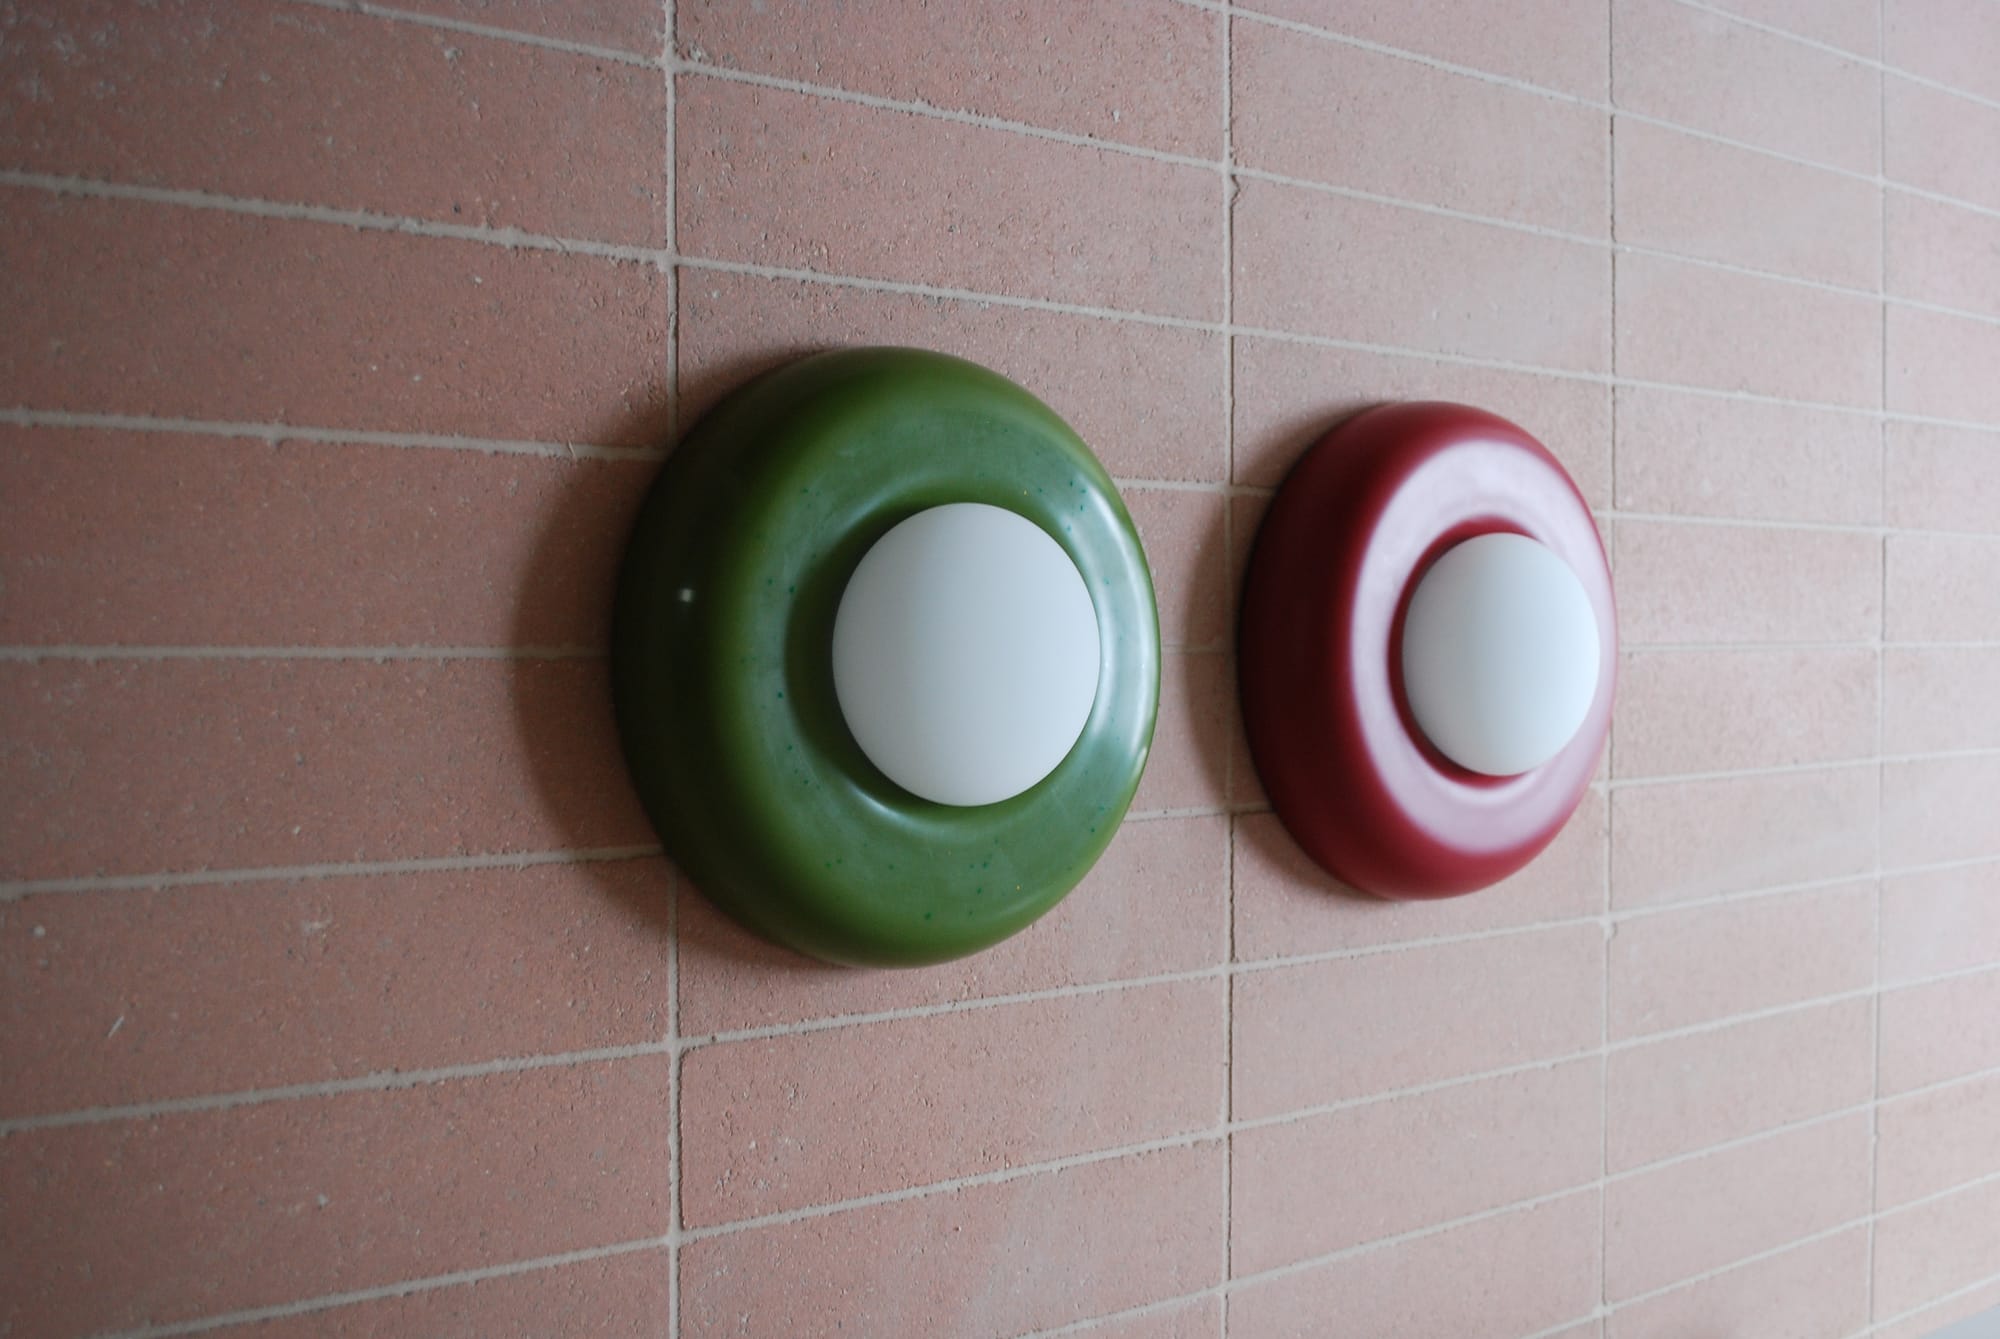 ChromaBlock Wall Sconces in red and green on a red tile wall